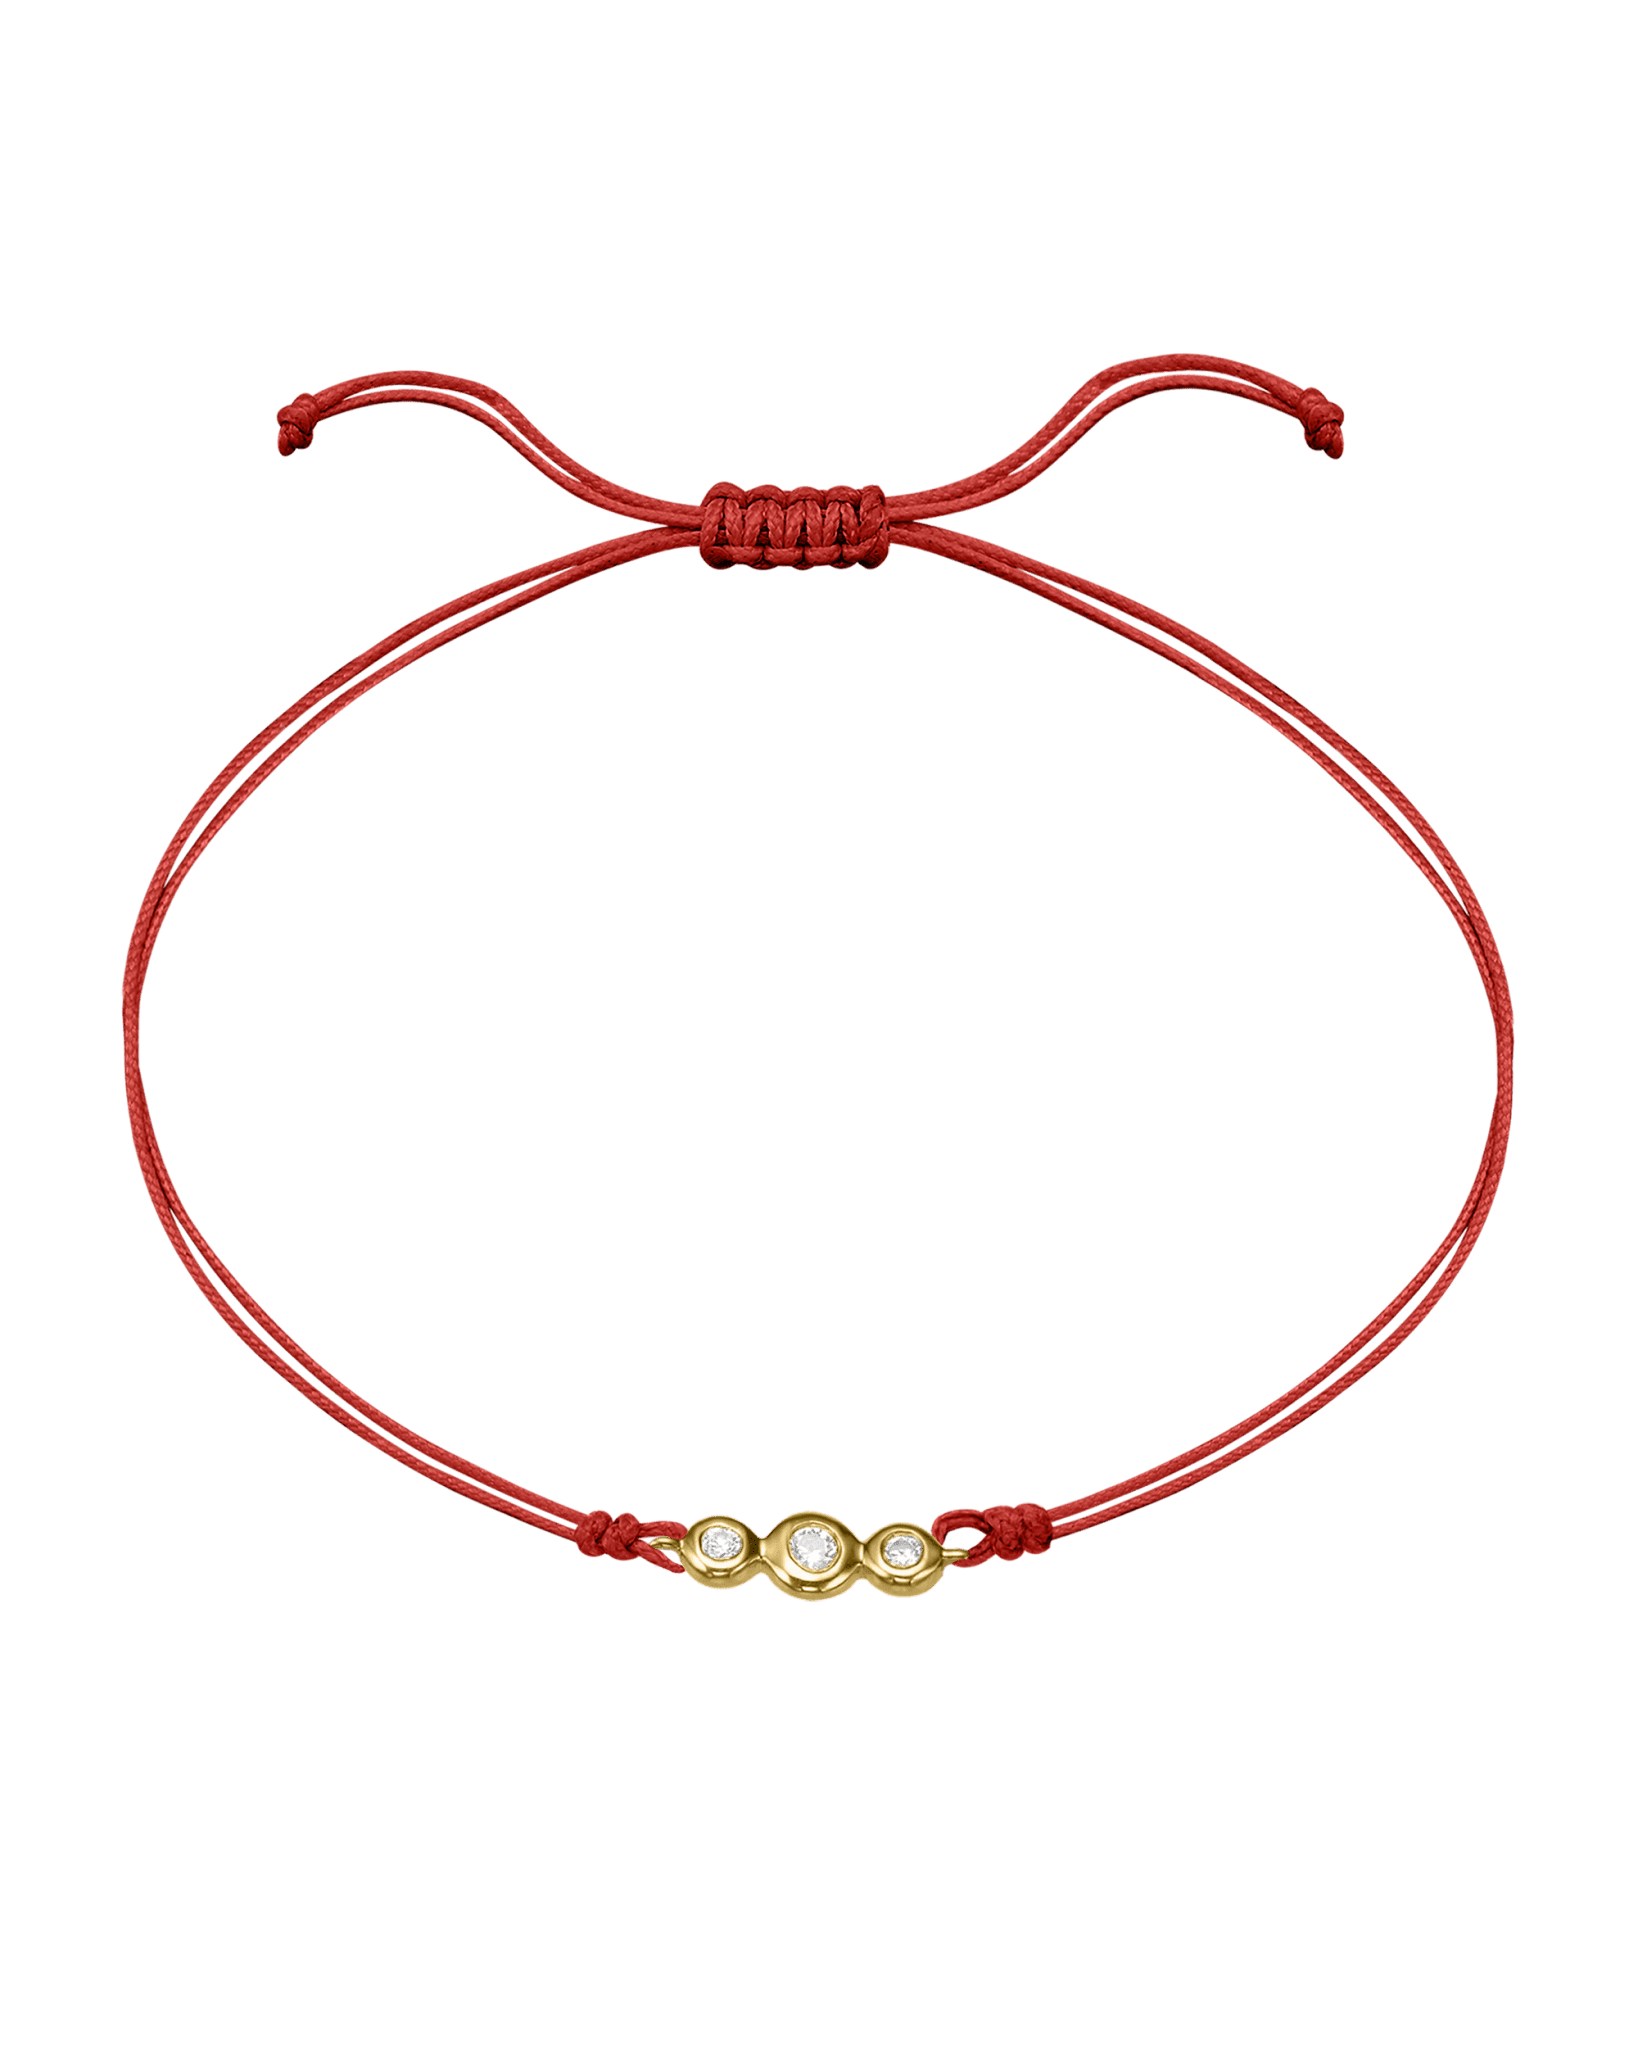 The Three of Us Diamond String of love - 14K Yellow Gold Bracelet 14K Solid Gold Red 